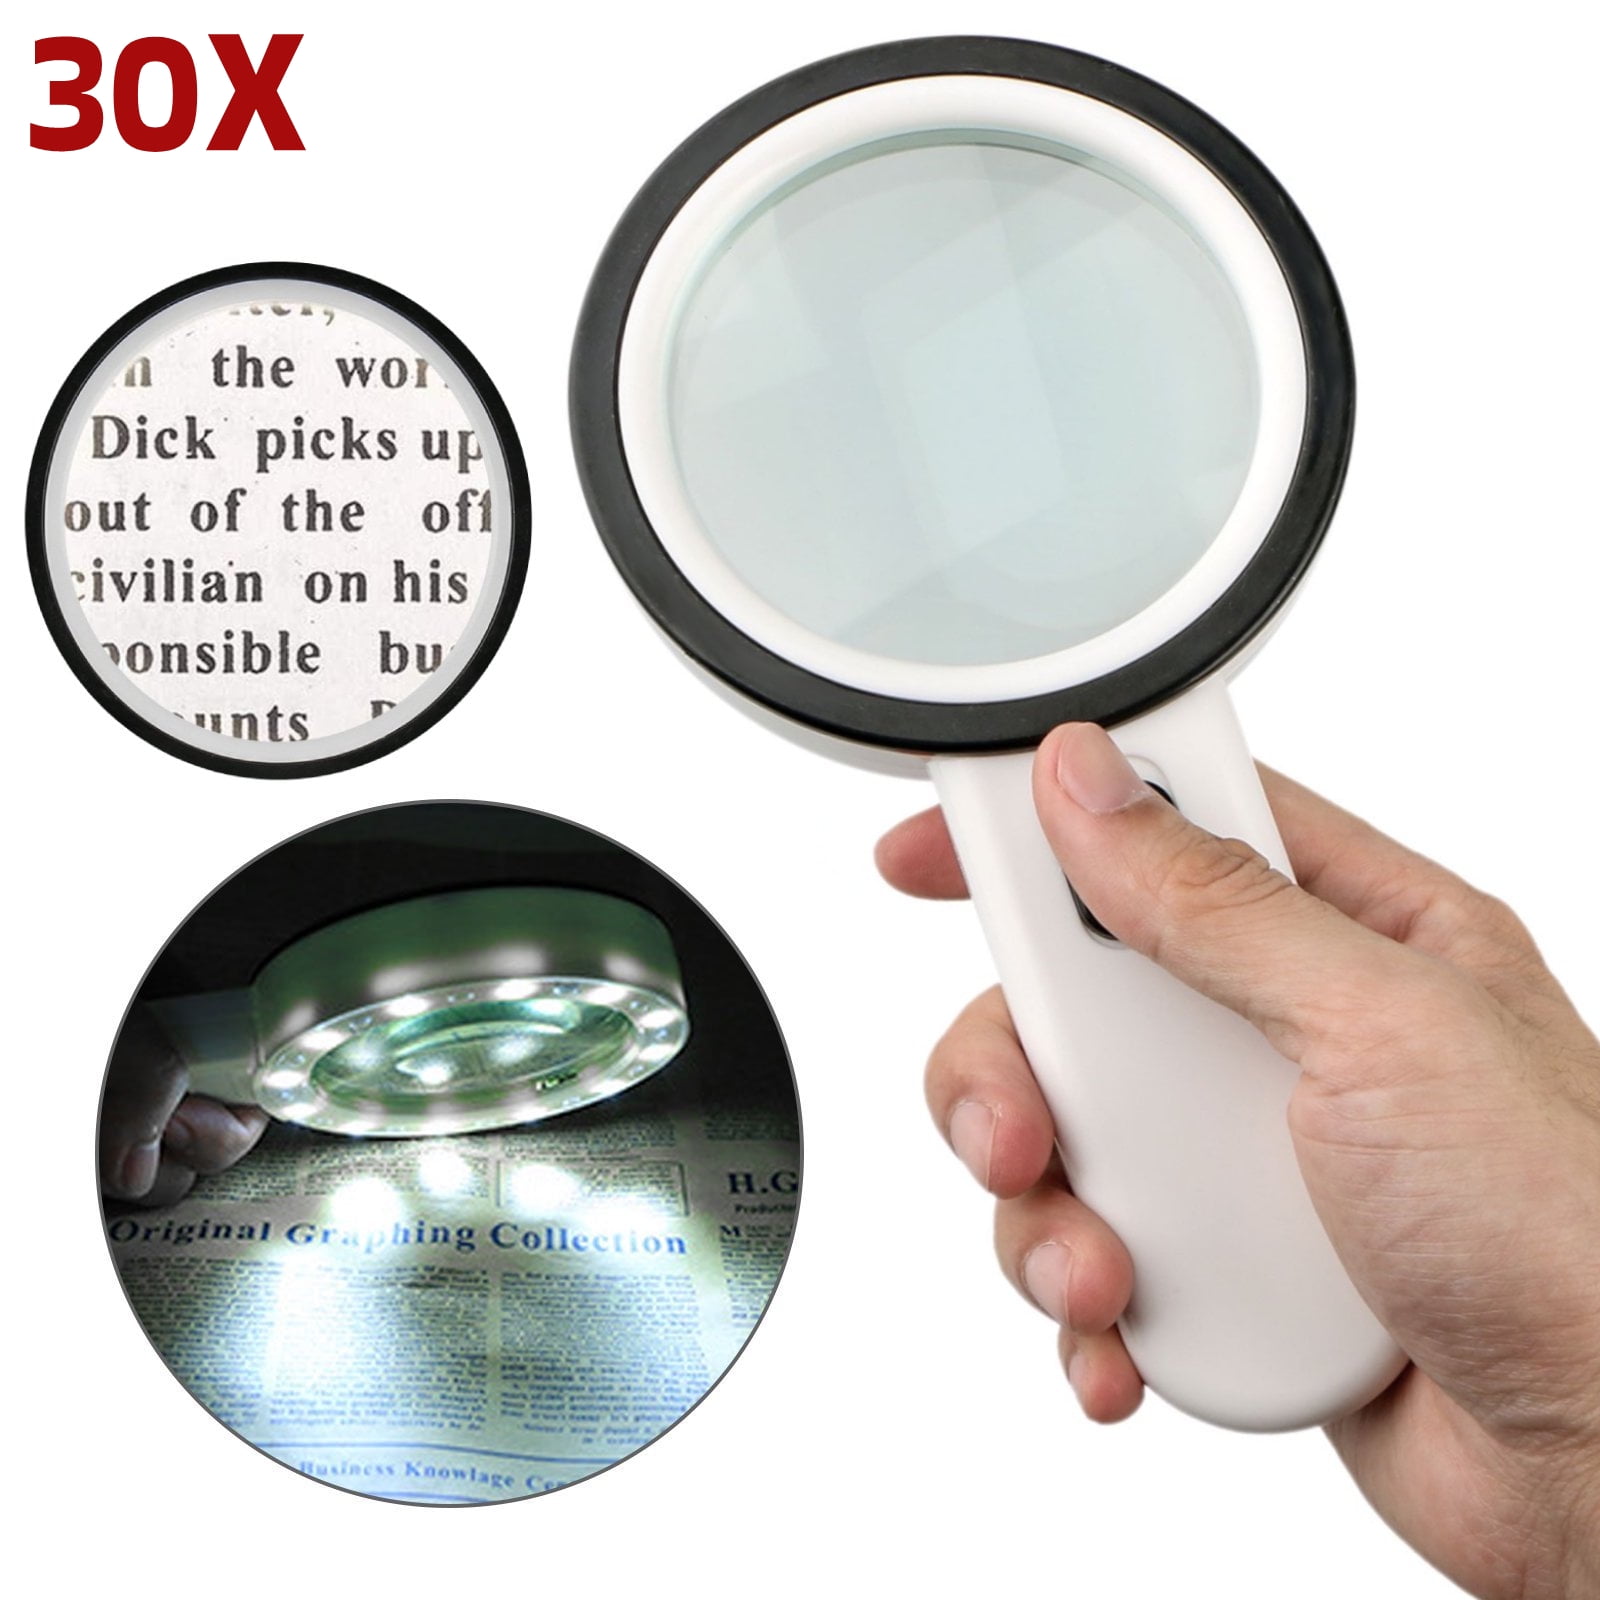 Magnifying REAL GLASS10X Magnifier handheld rectangular read coin stamp LargeFO 